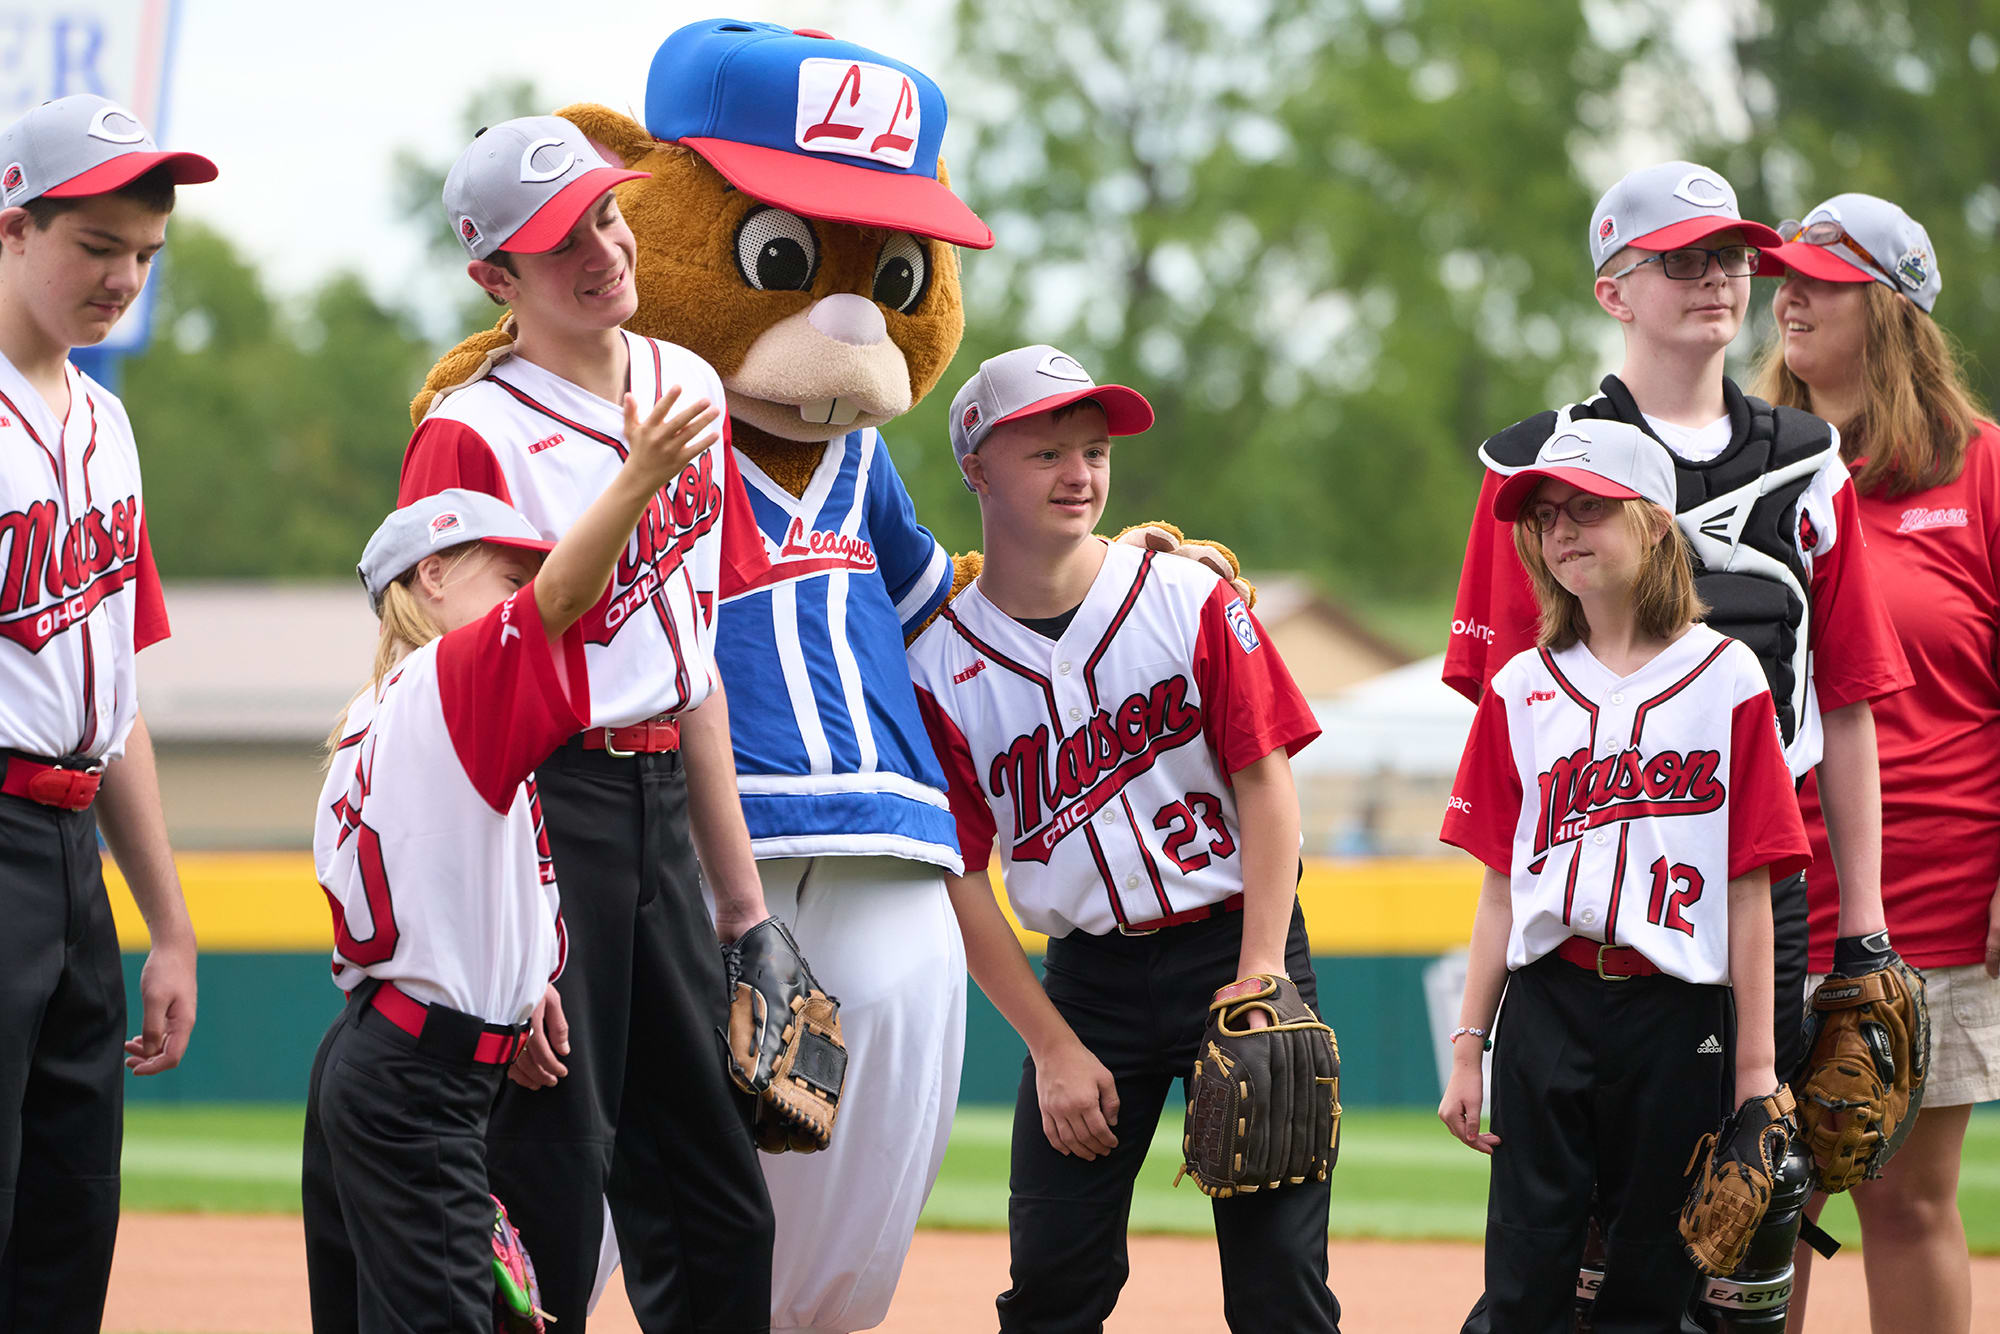 Dugout Earns 2022 Mascot Hall of Fame Award for Greatest Community